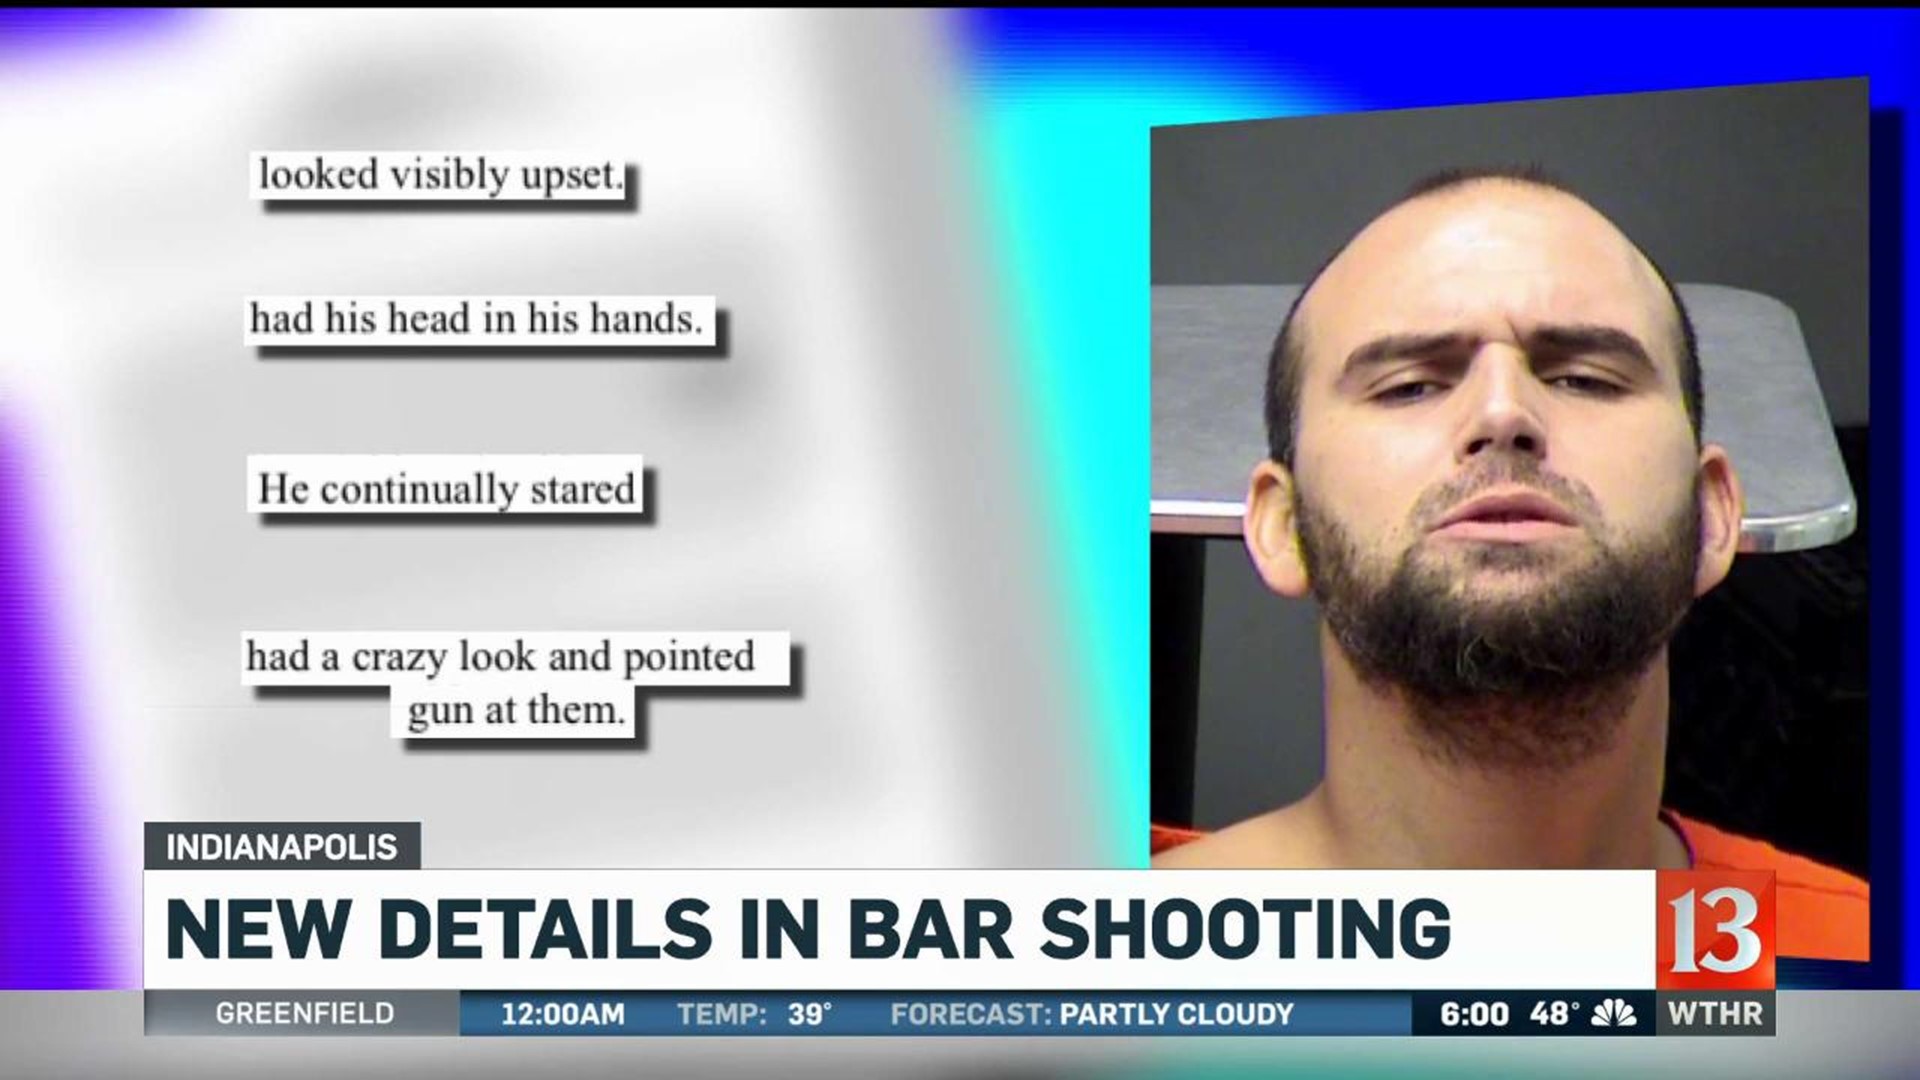 New details in bar shooting